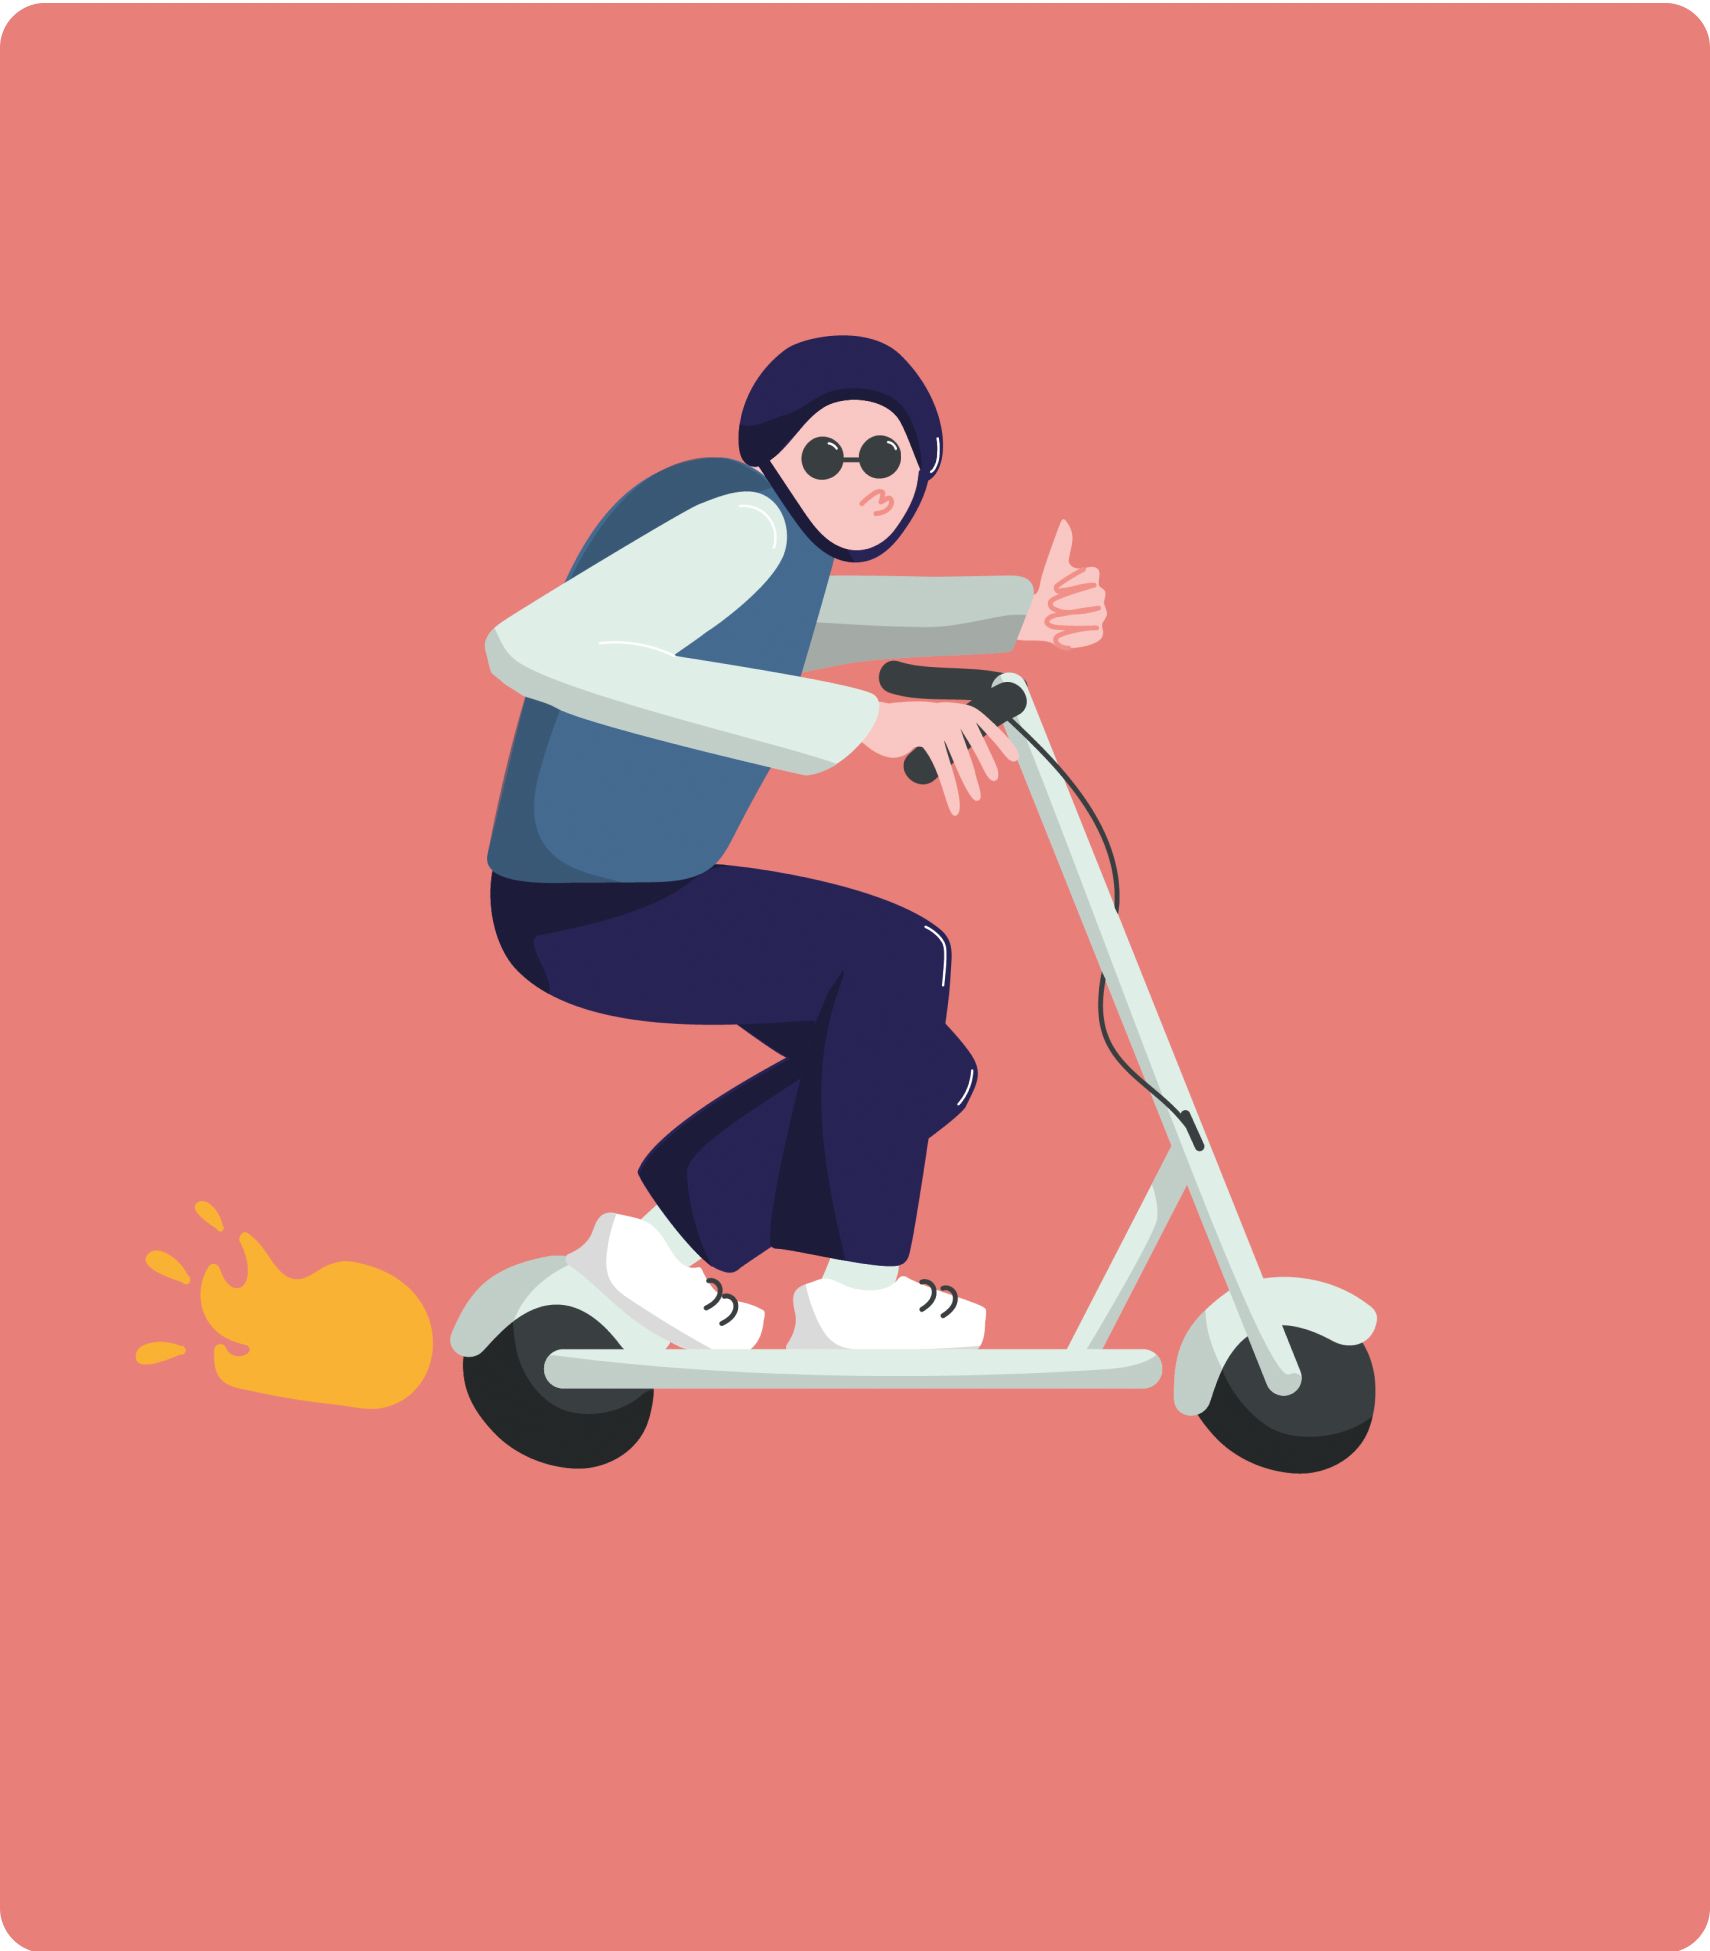 Illustration of a person riding an e-scooter and giving a thumbs up.